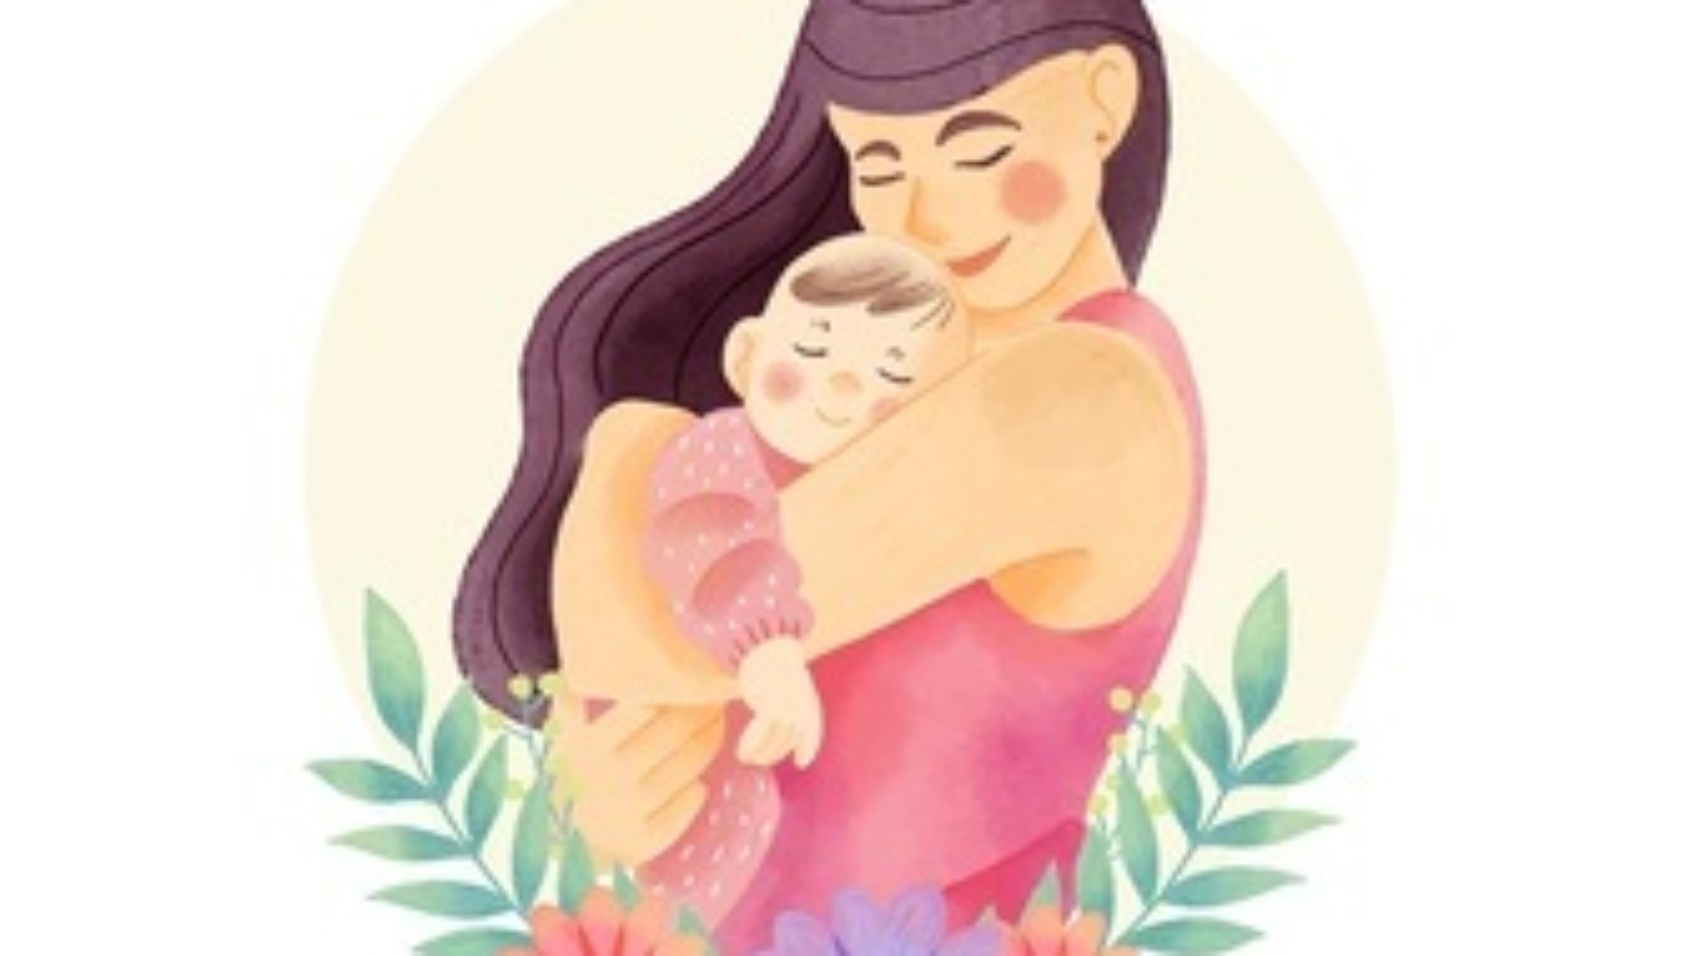 watercolor-mother-s-day-greeting_23-2148473721